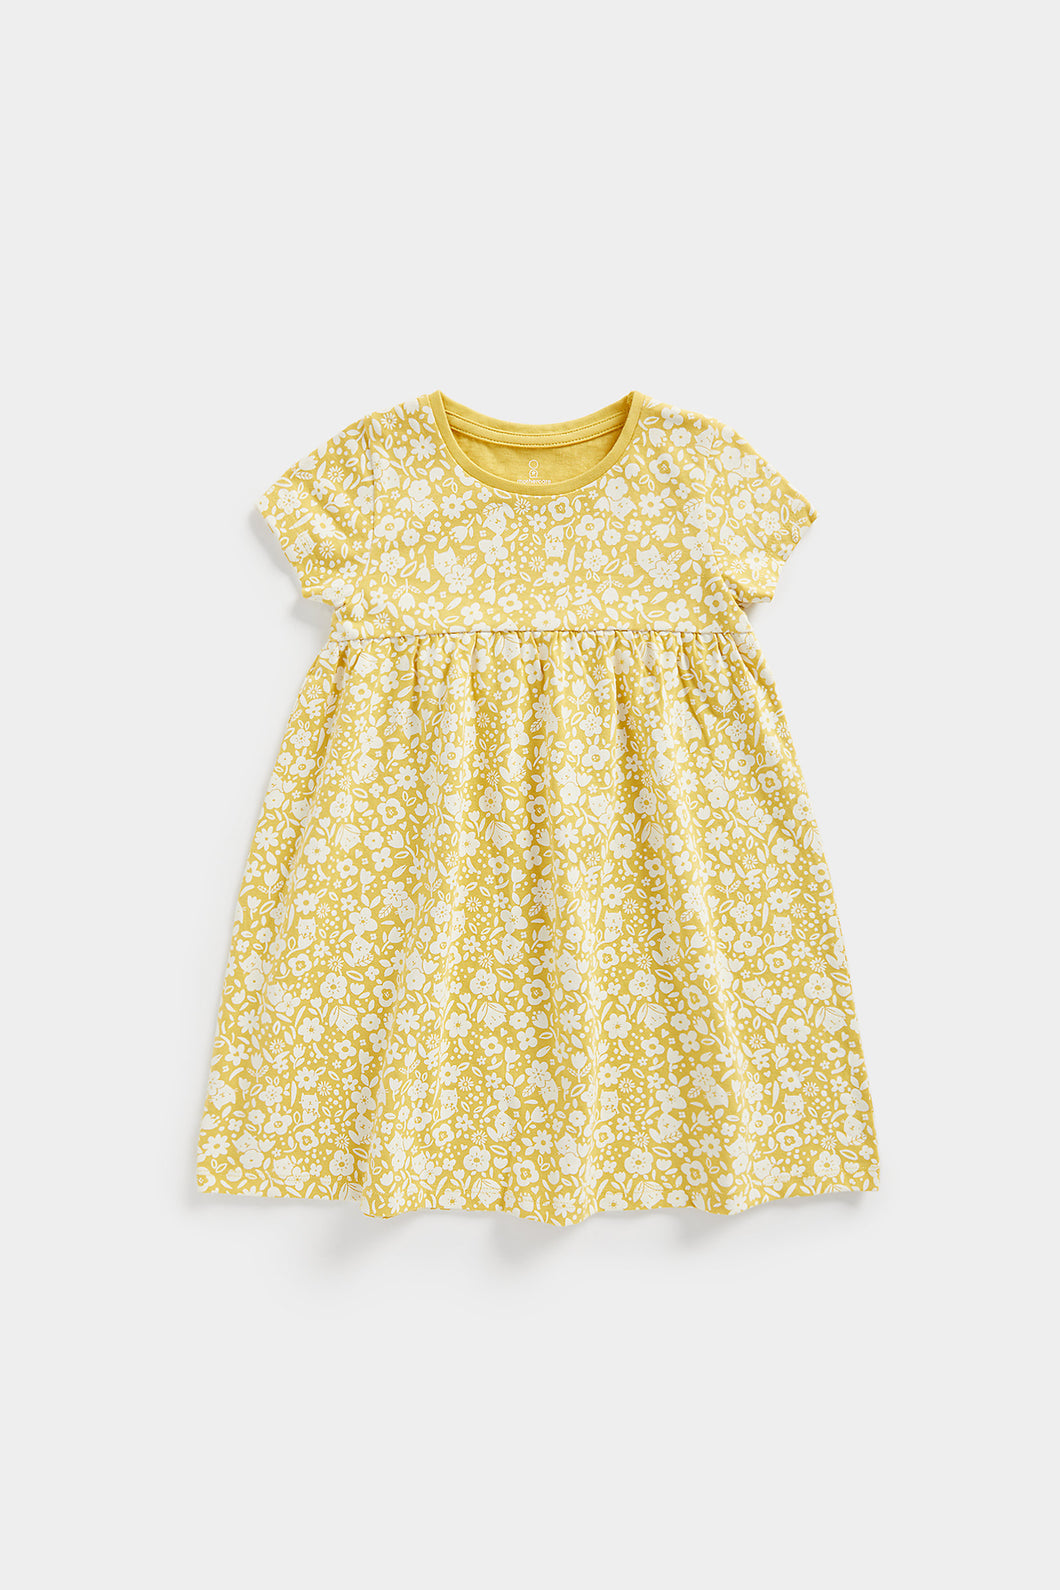 Mothercare Mustard Floral Jersey Dress